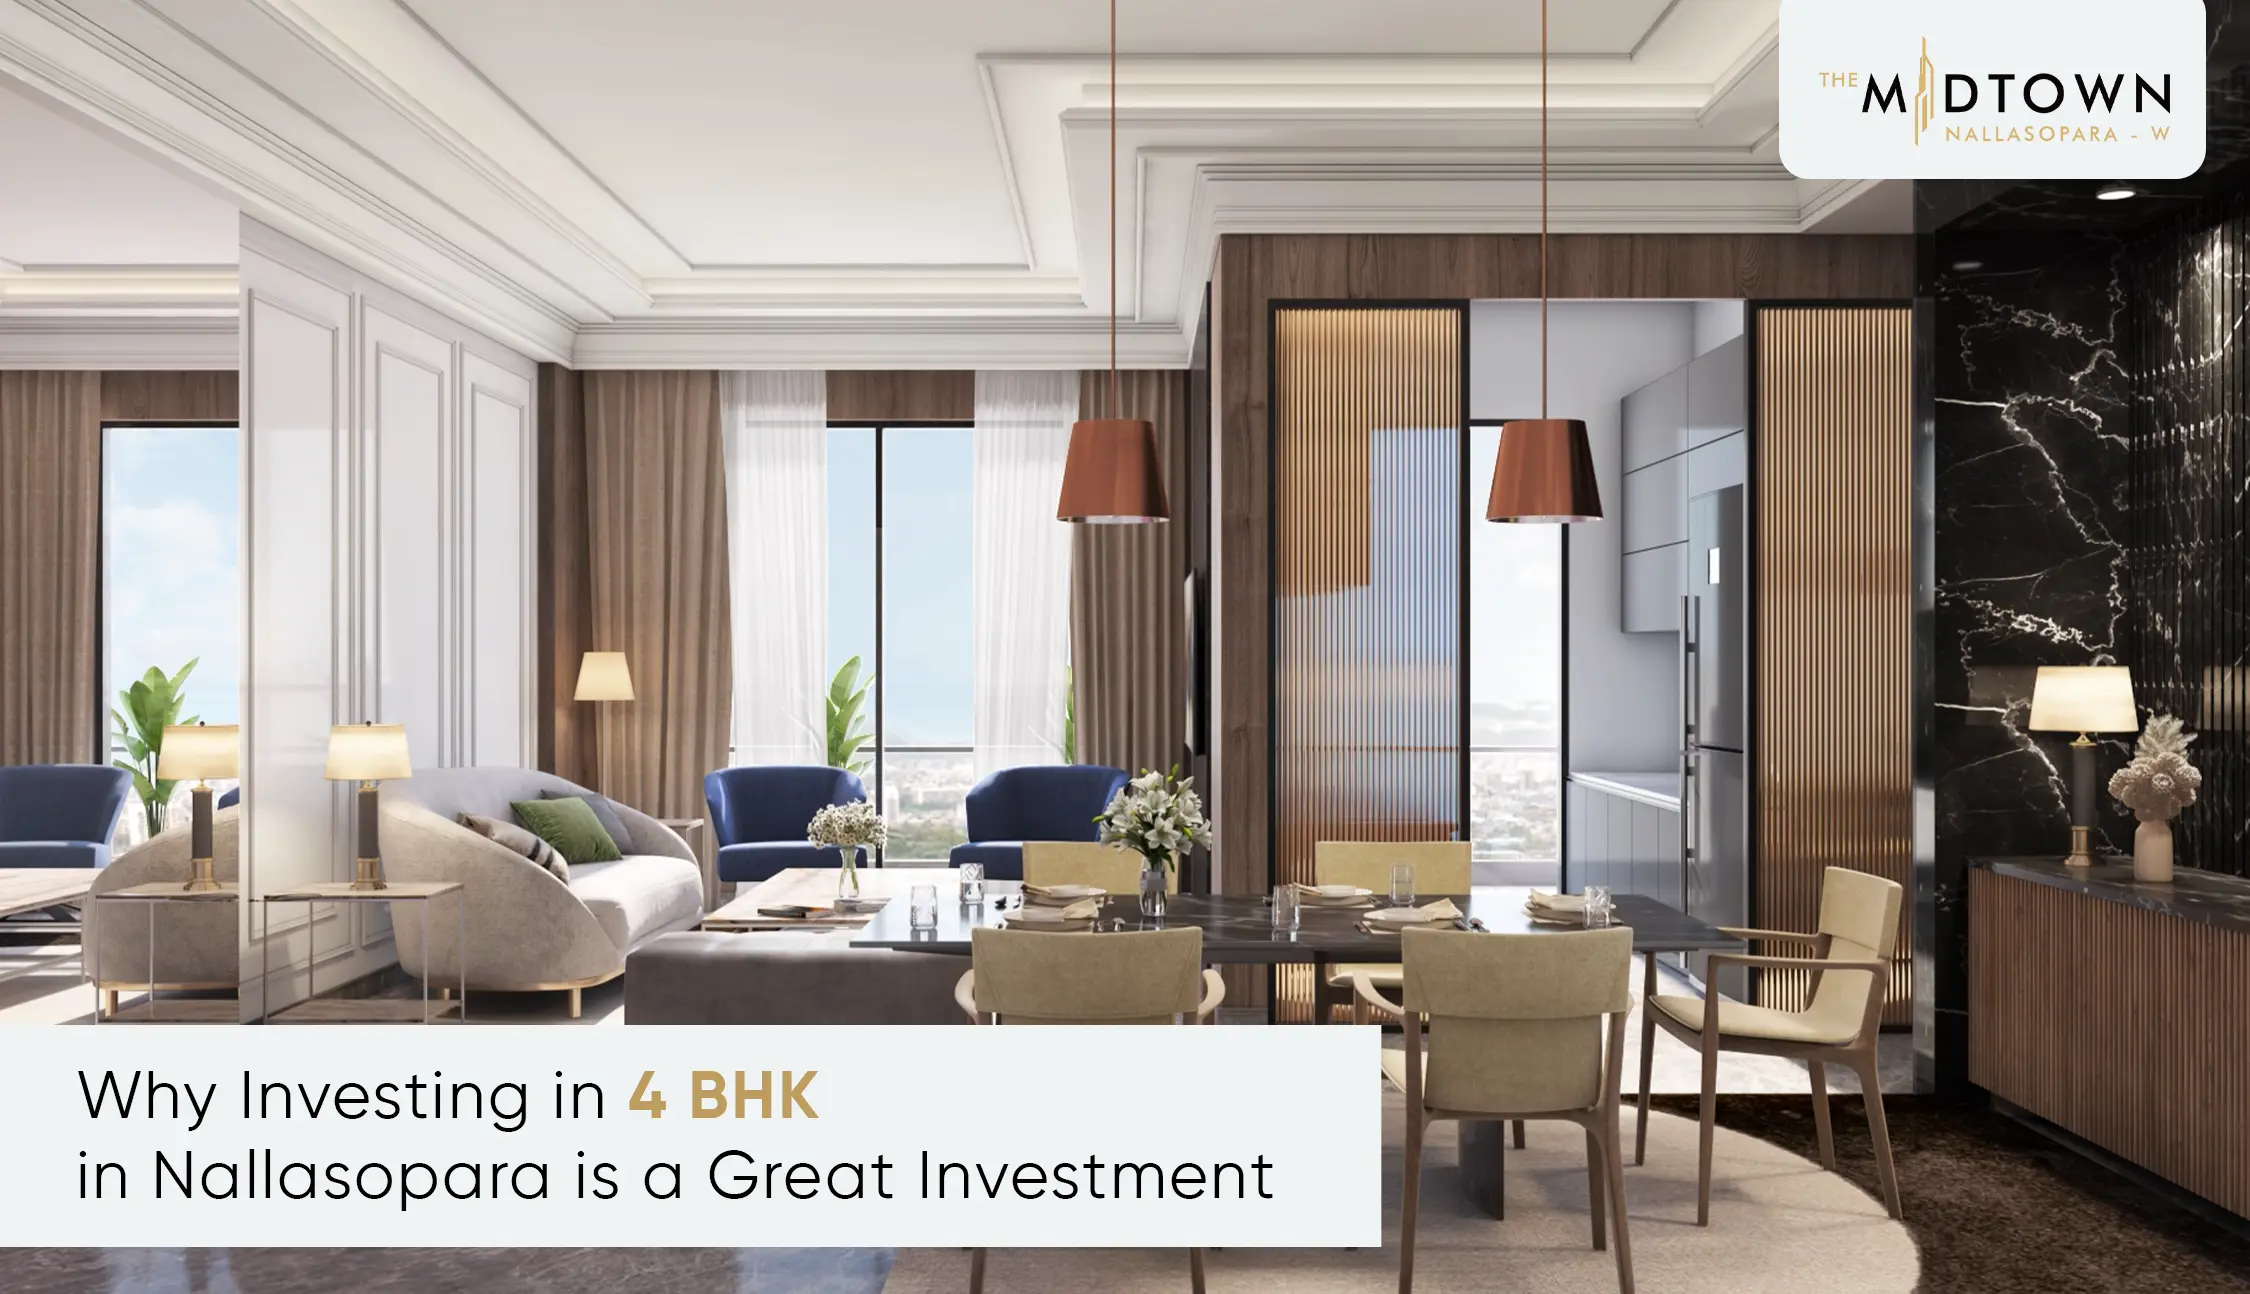 Why Investing in 4 BHK in Nallasopara is a Great Investment